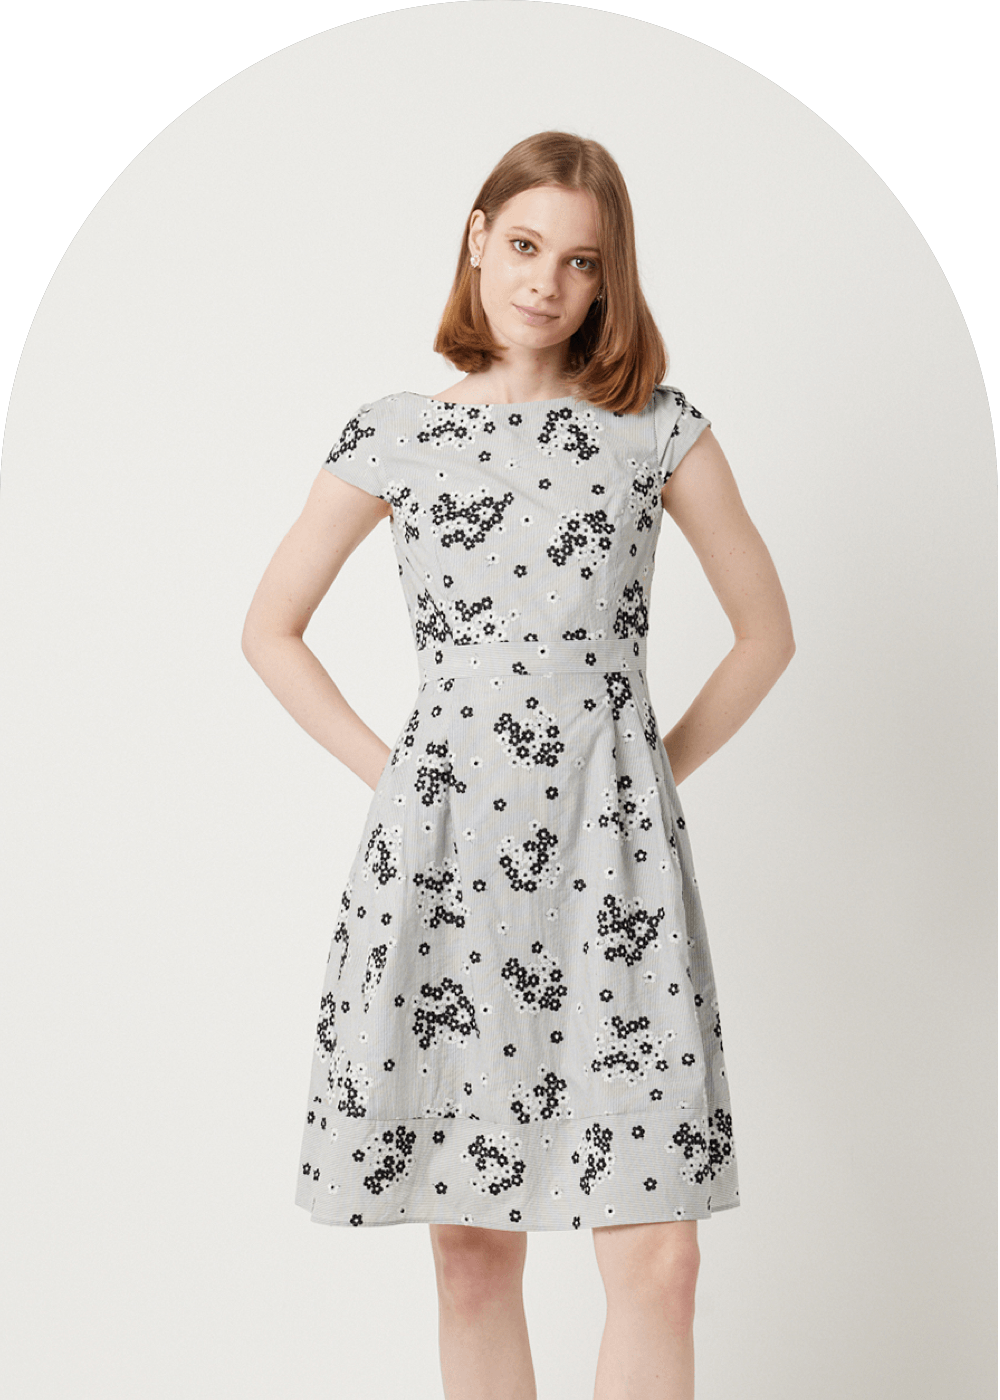 My Only Dress – TOCCA OFFICIAL SITE